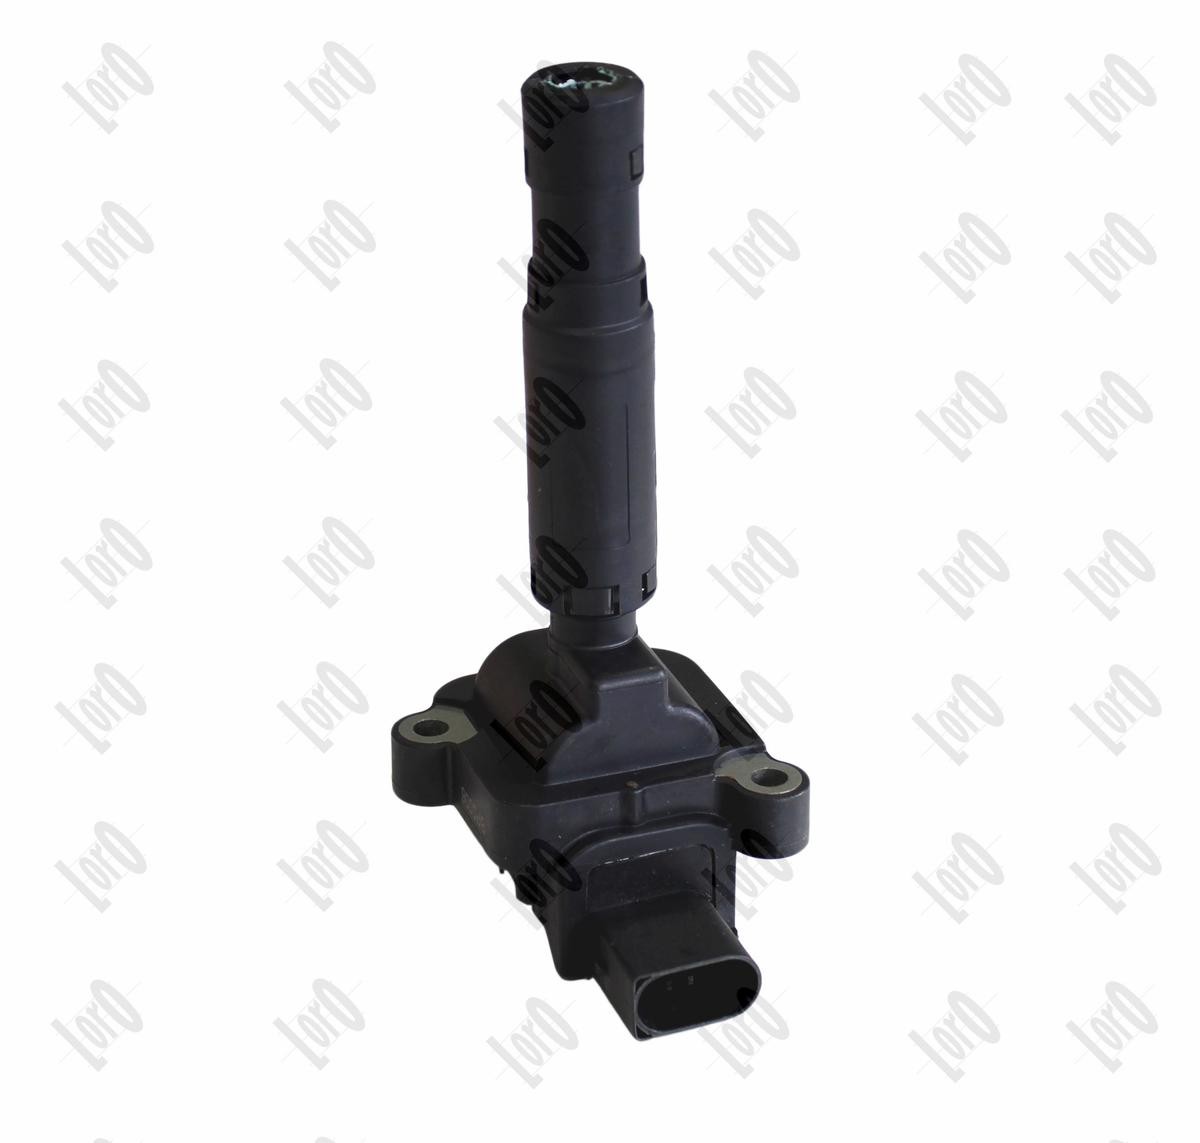 ABAKUS 122-01-125 Ignition coil 1, 3-pin connector, Connector Type SAE